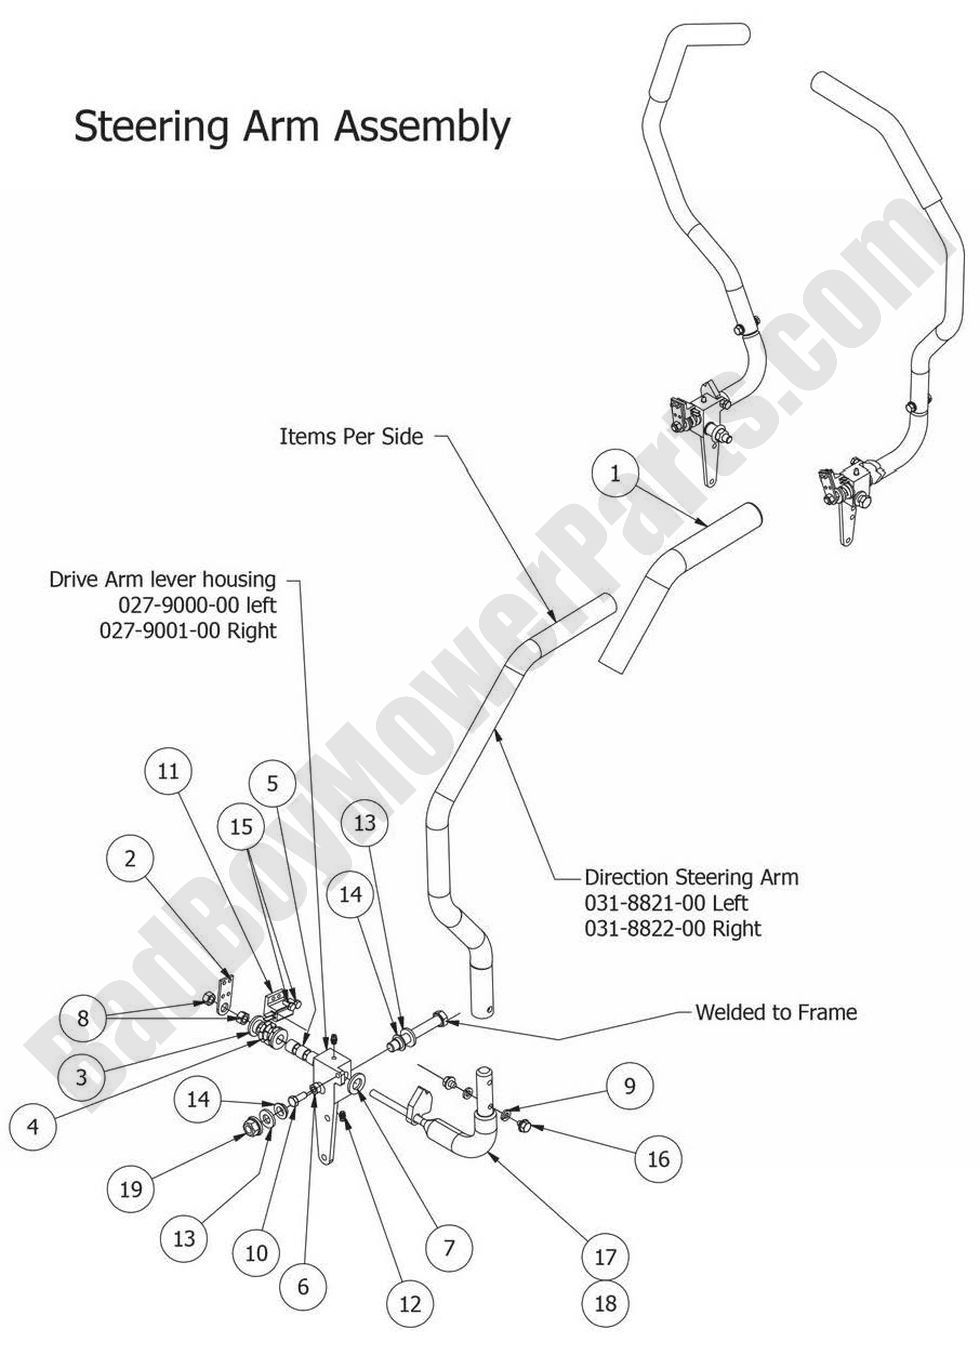 2014 MZ Drive Arm Assembly